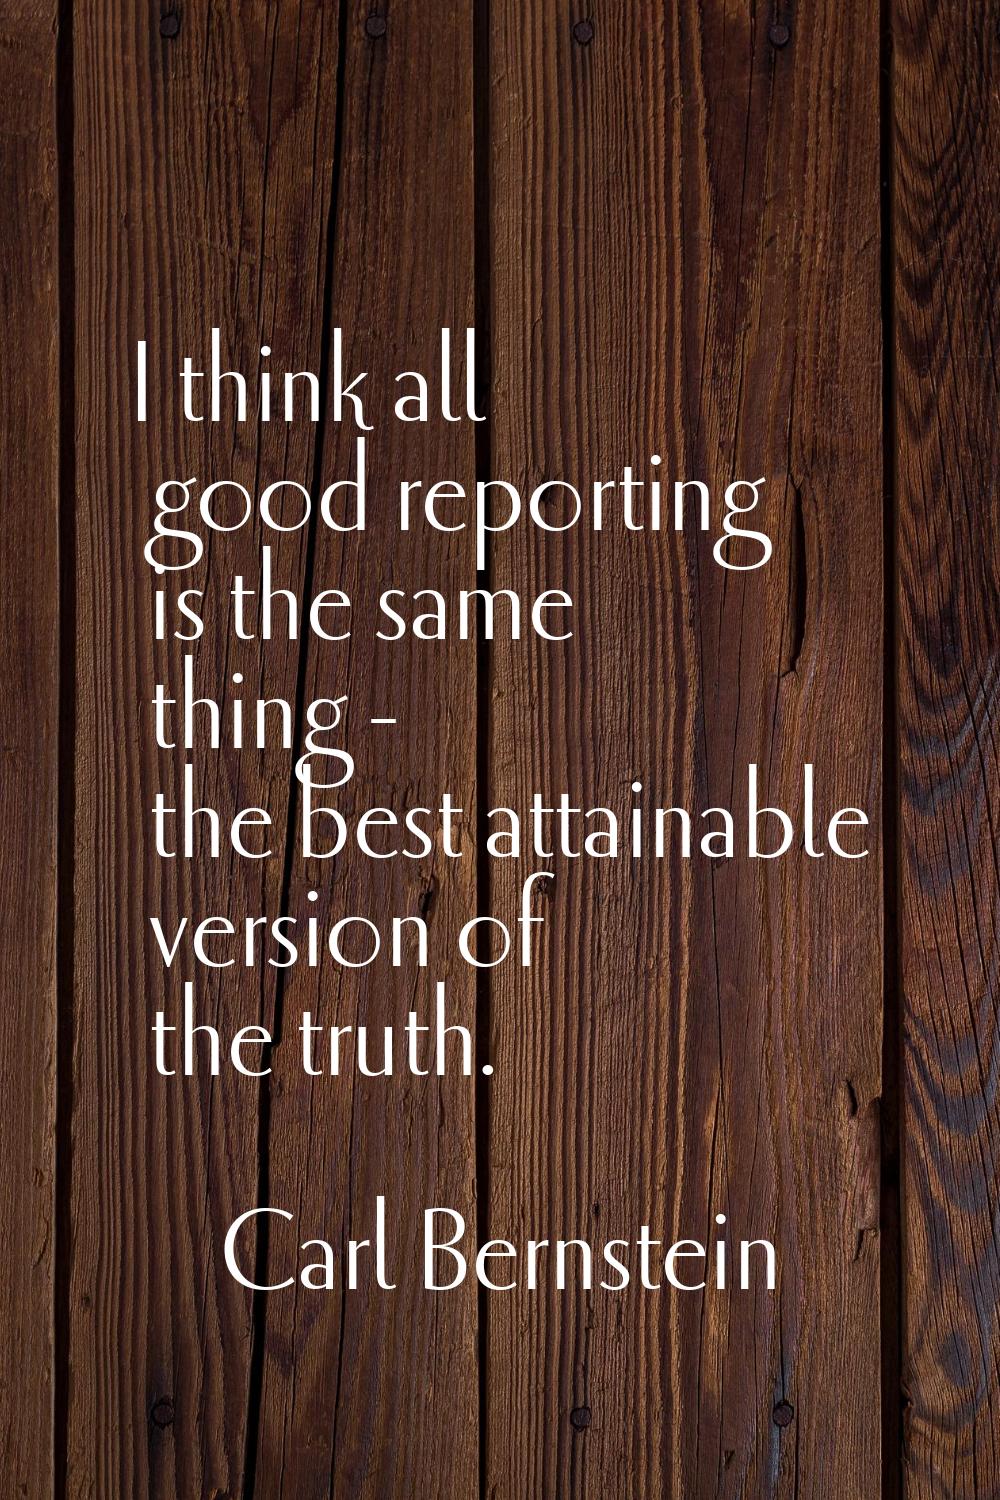 I think all good reporting is the same thing - the best attainable version of the truth.